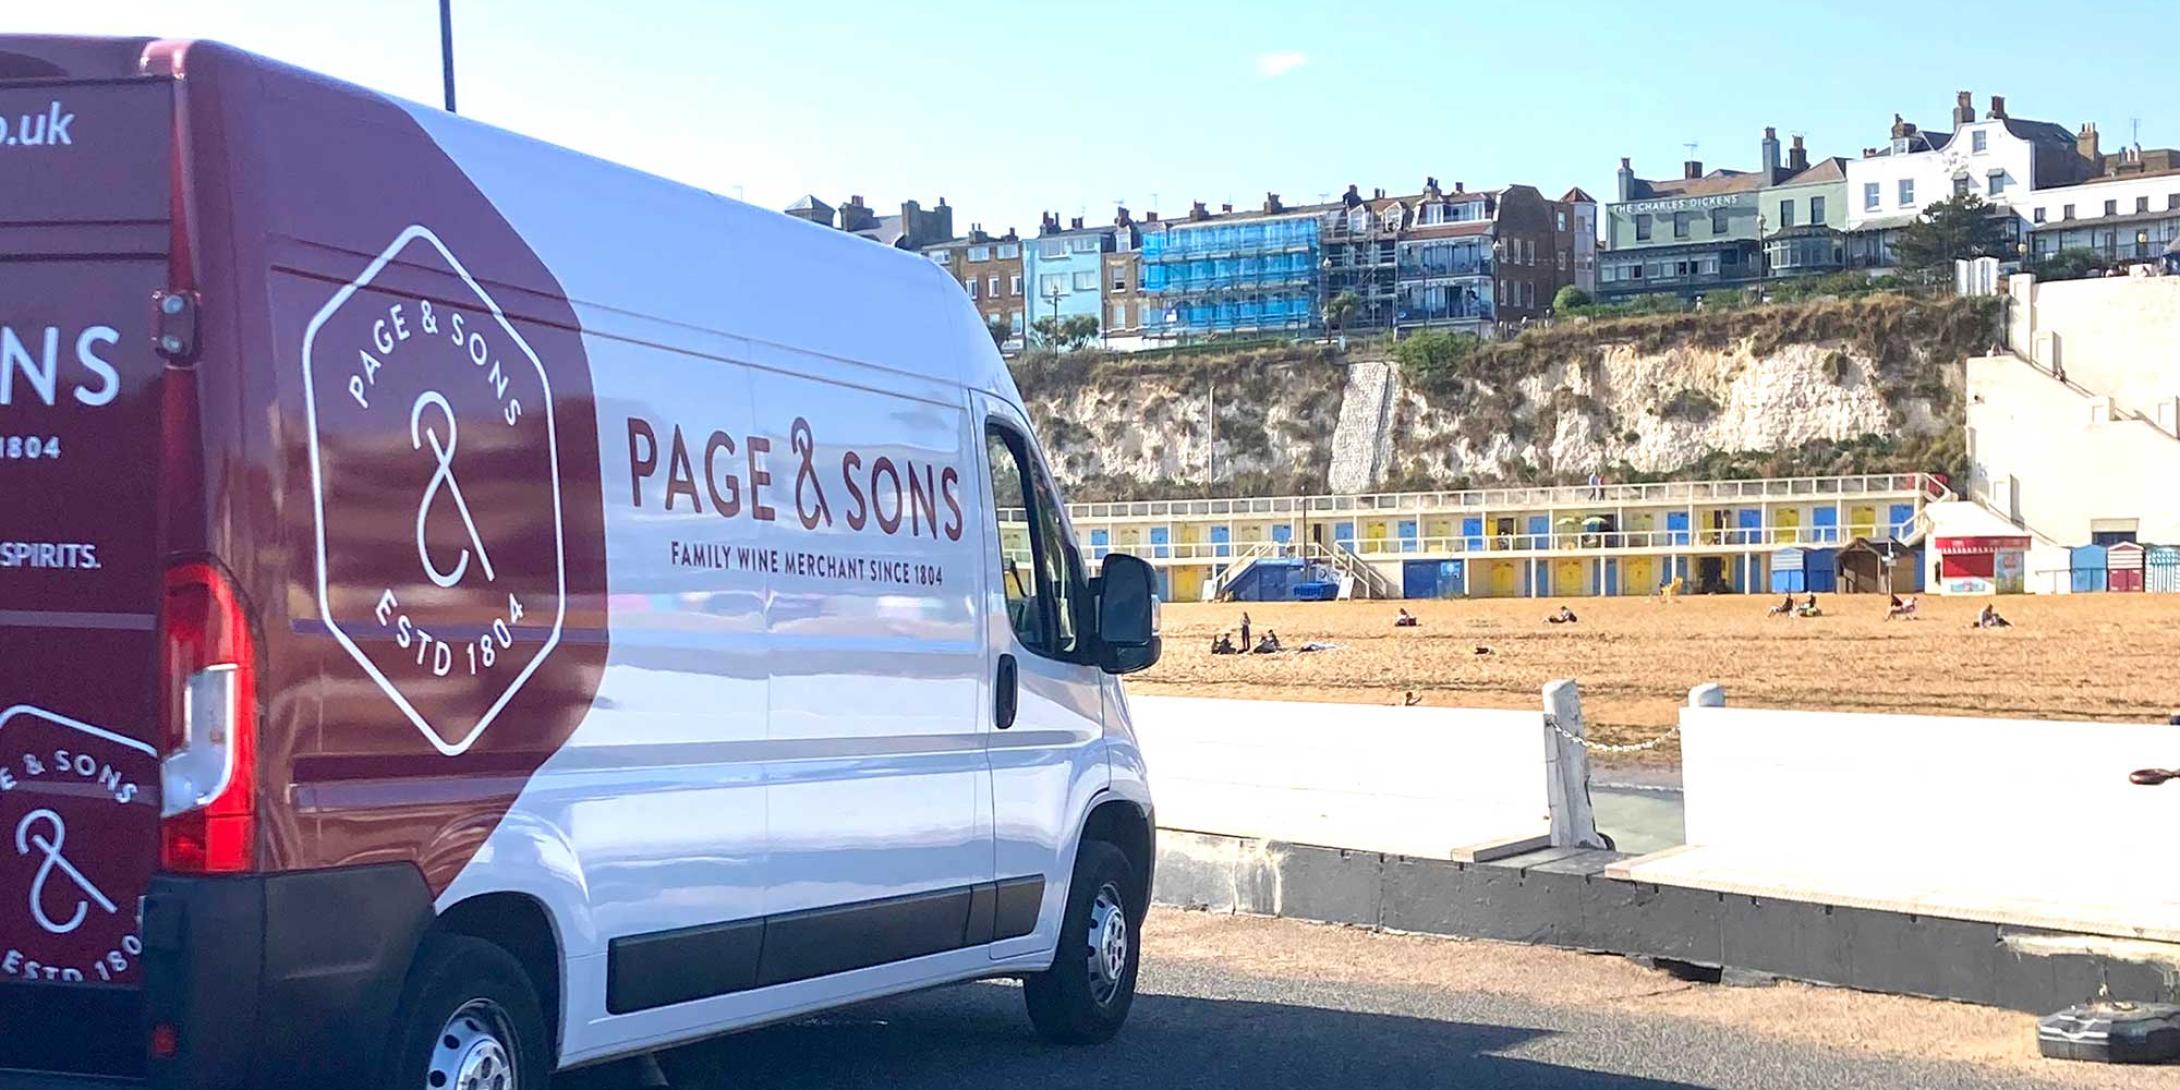 Page & Sons van parked by a beach front